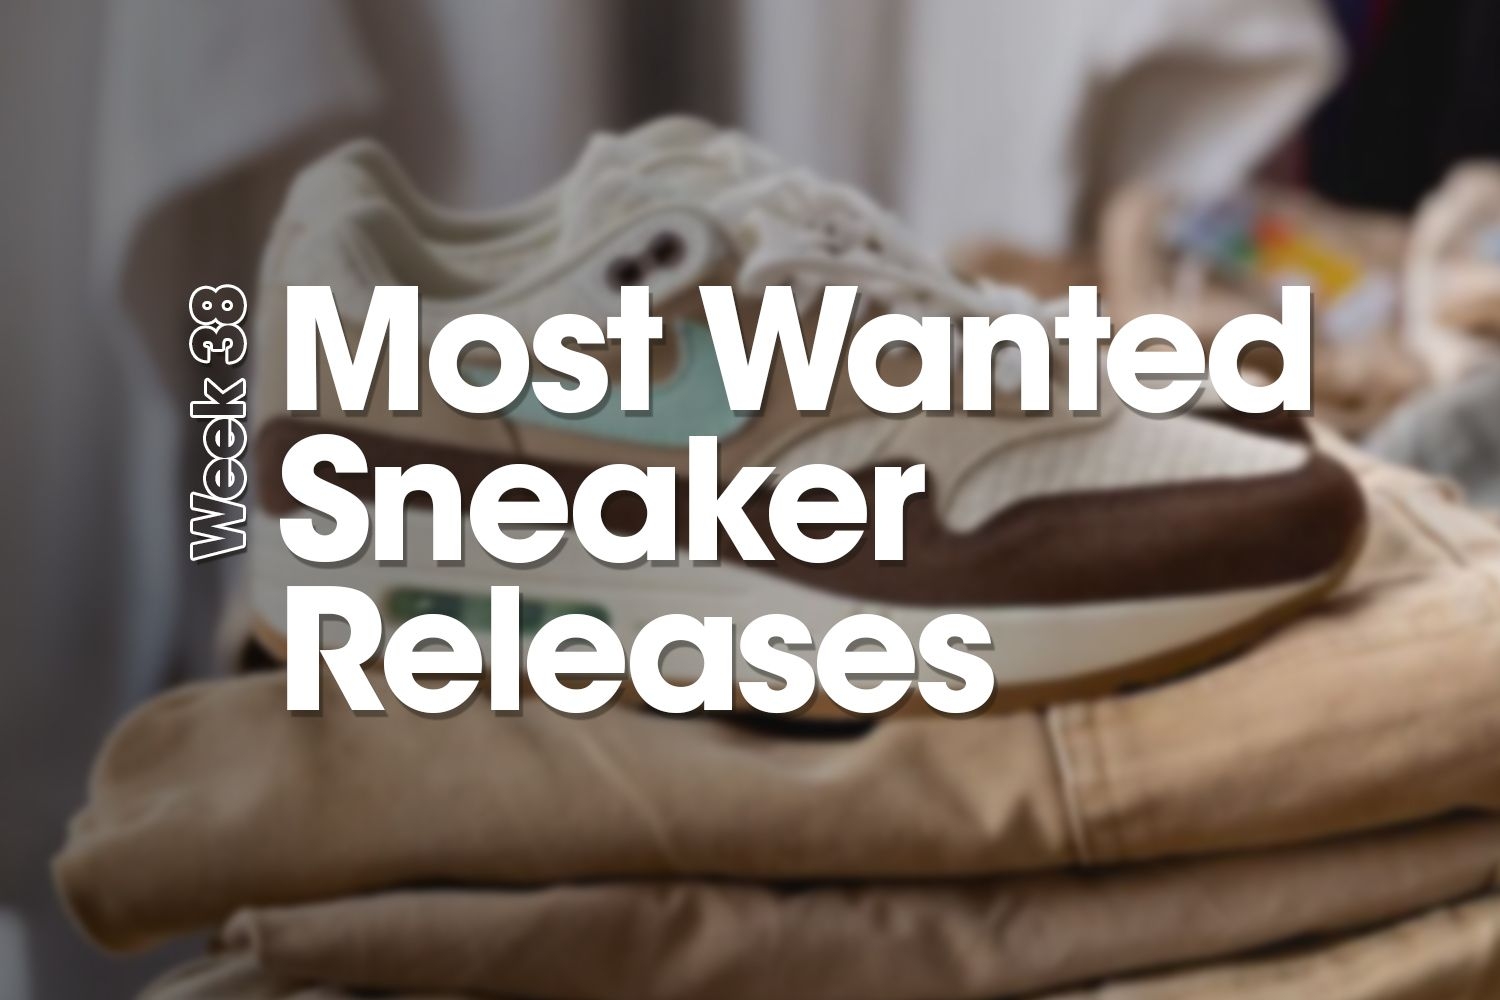 Most Wanted Sneaker Releases - Woche 38